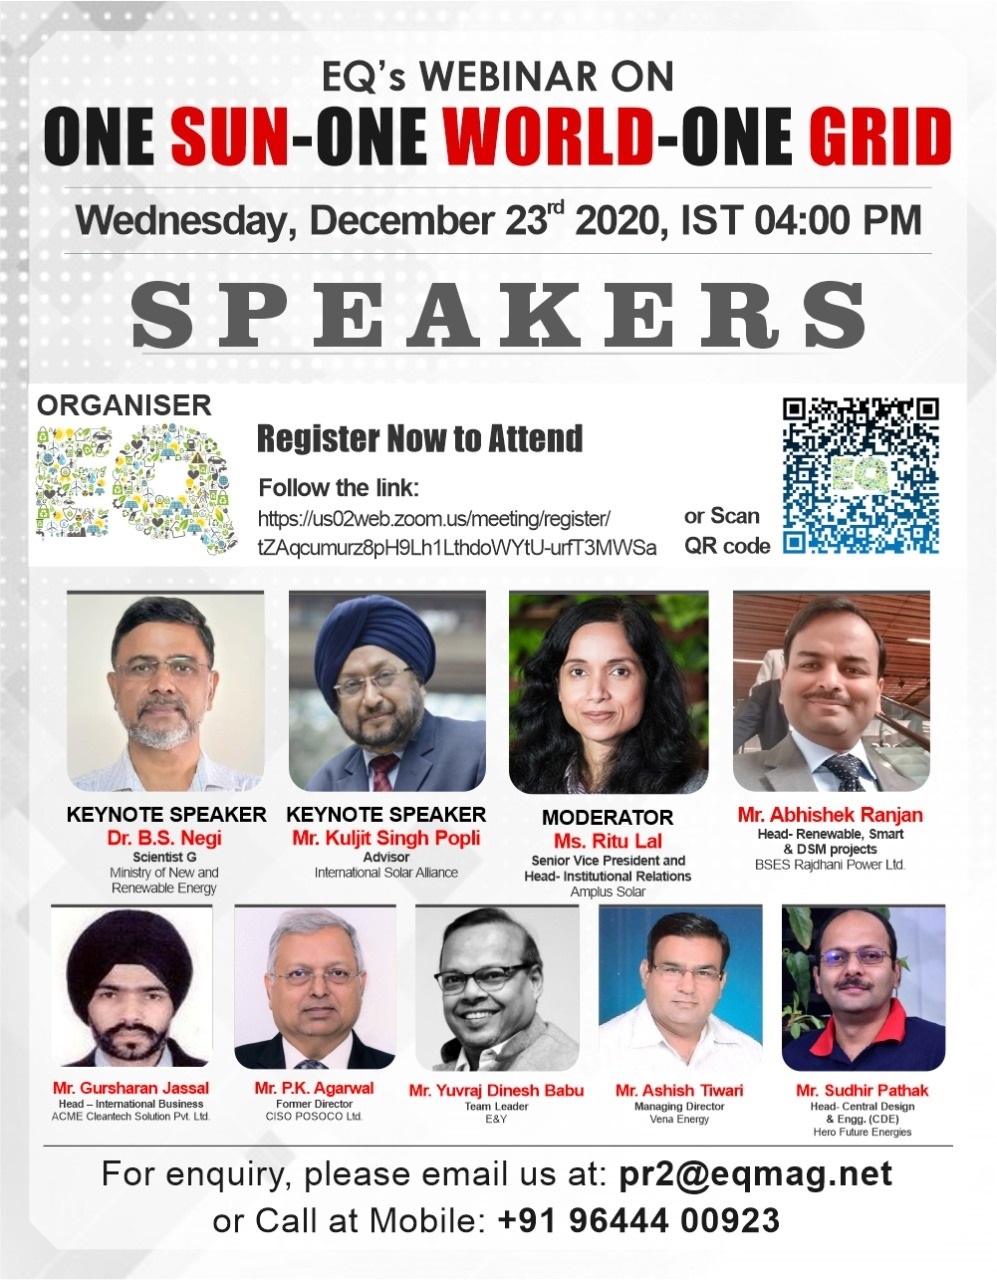 EQ Webinar on One Sun One World One Grid on Wednesday December 23rd from 04:00 PM Onwards….Register Now !!!